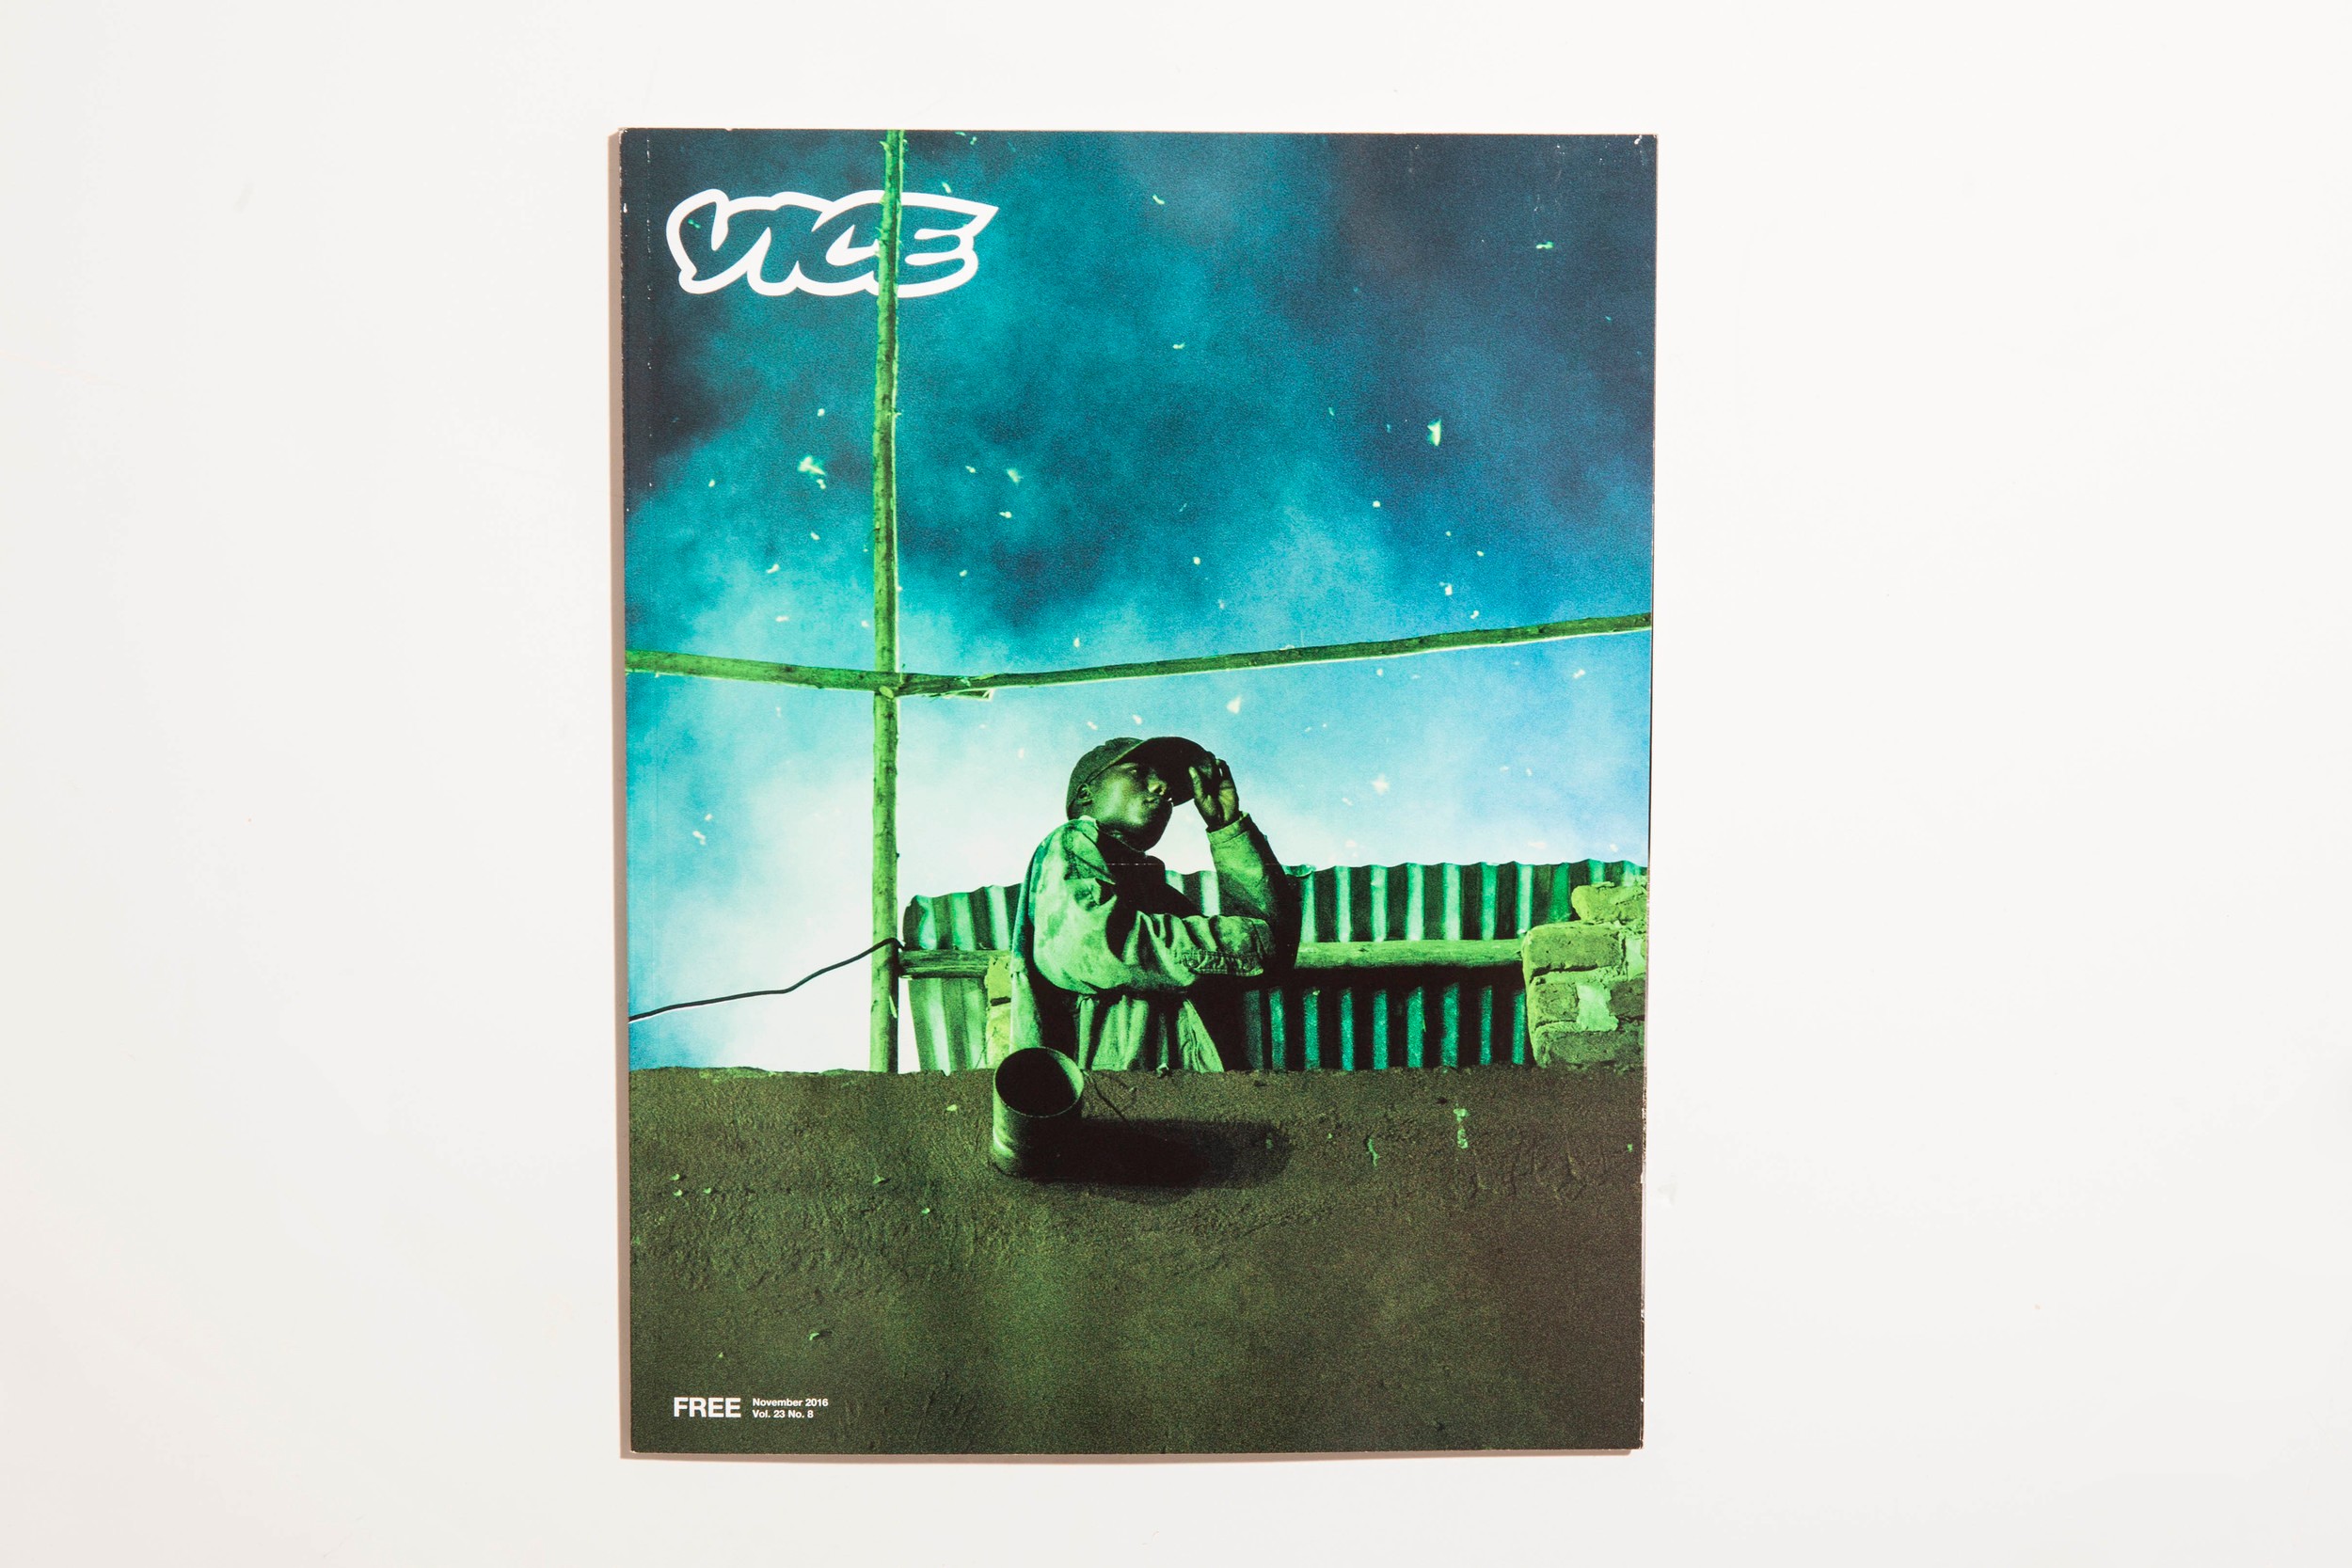 The November Issue Of Vice Magazine Is Now Online